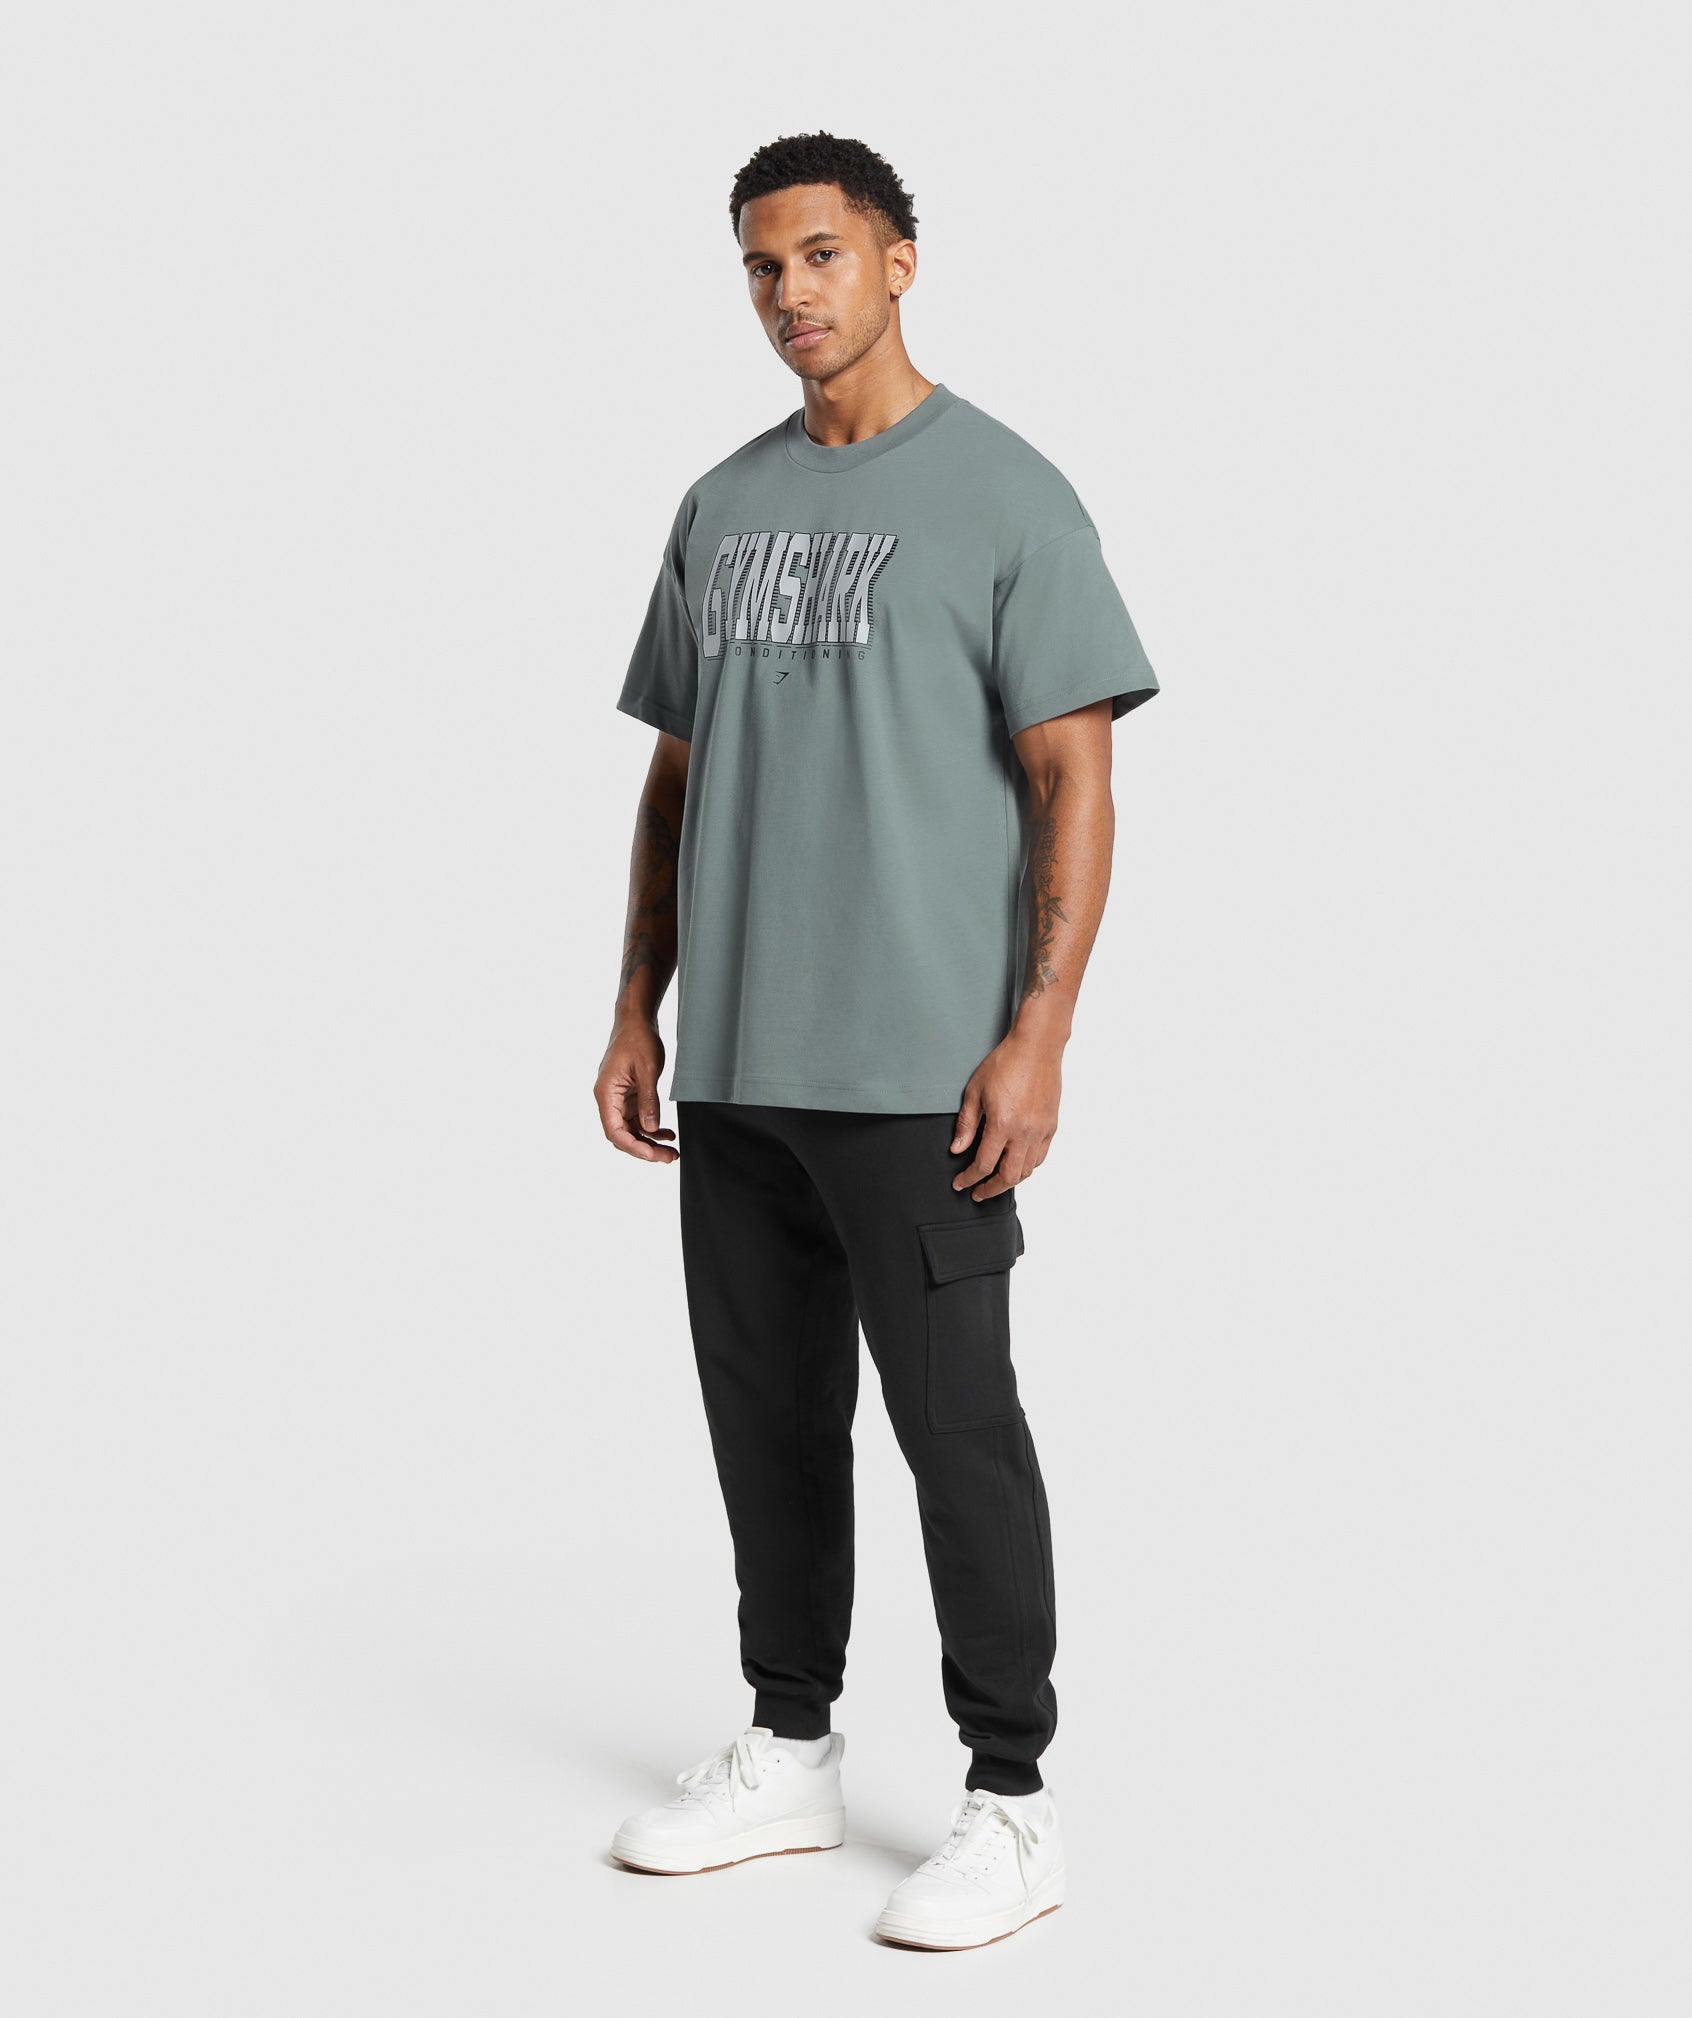 Conditioning Graphic T-Shirt in Cargo Teal - view 4